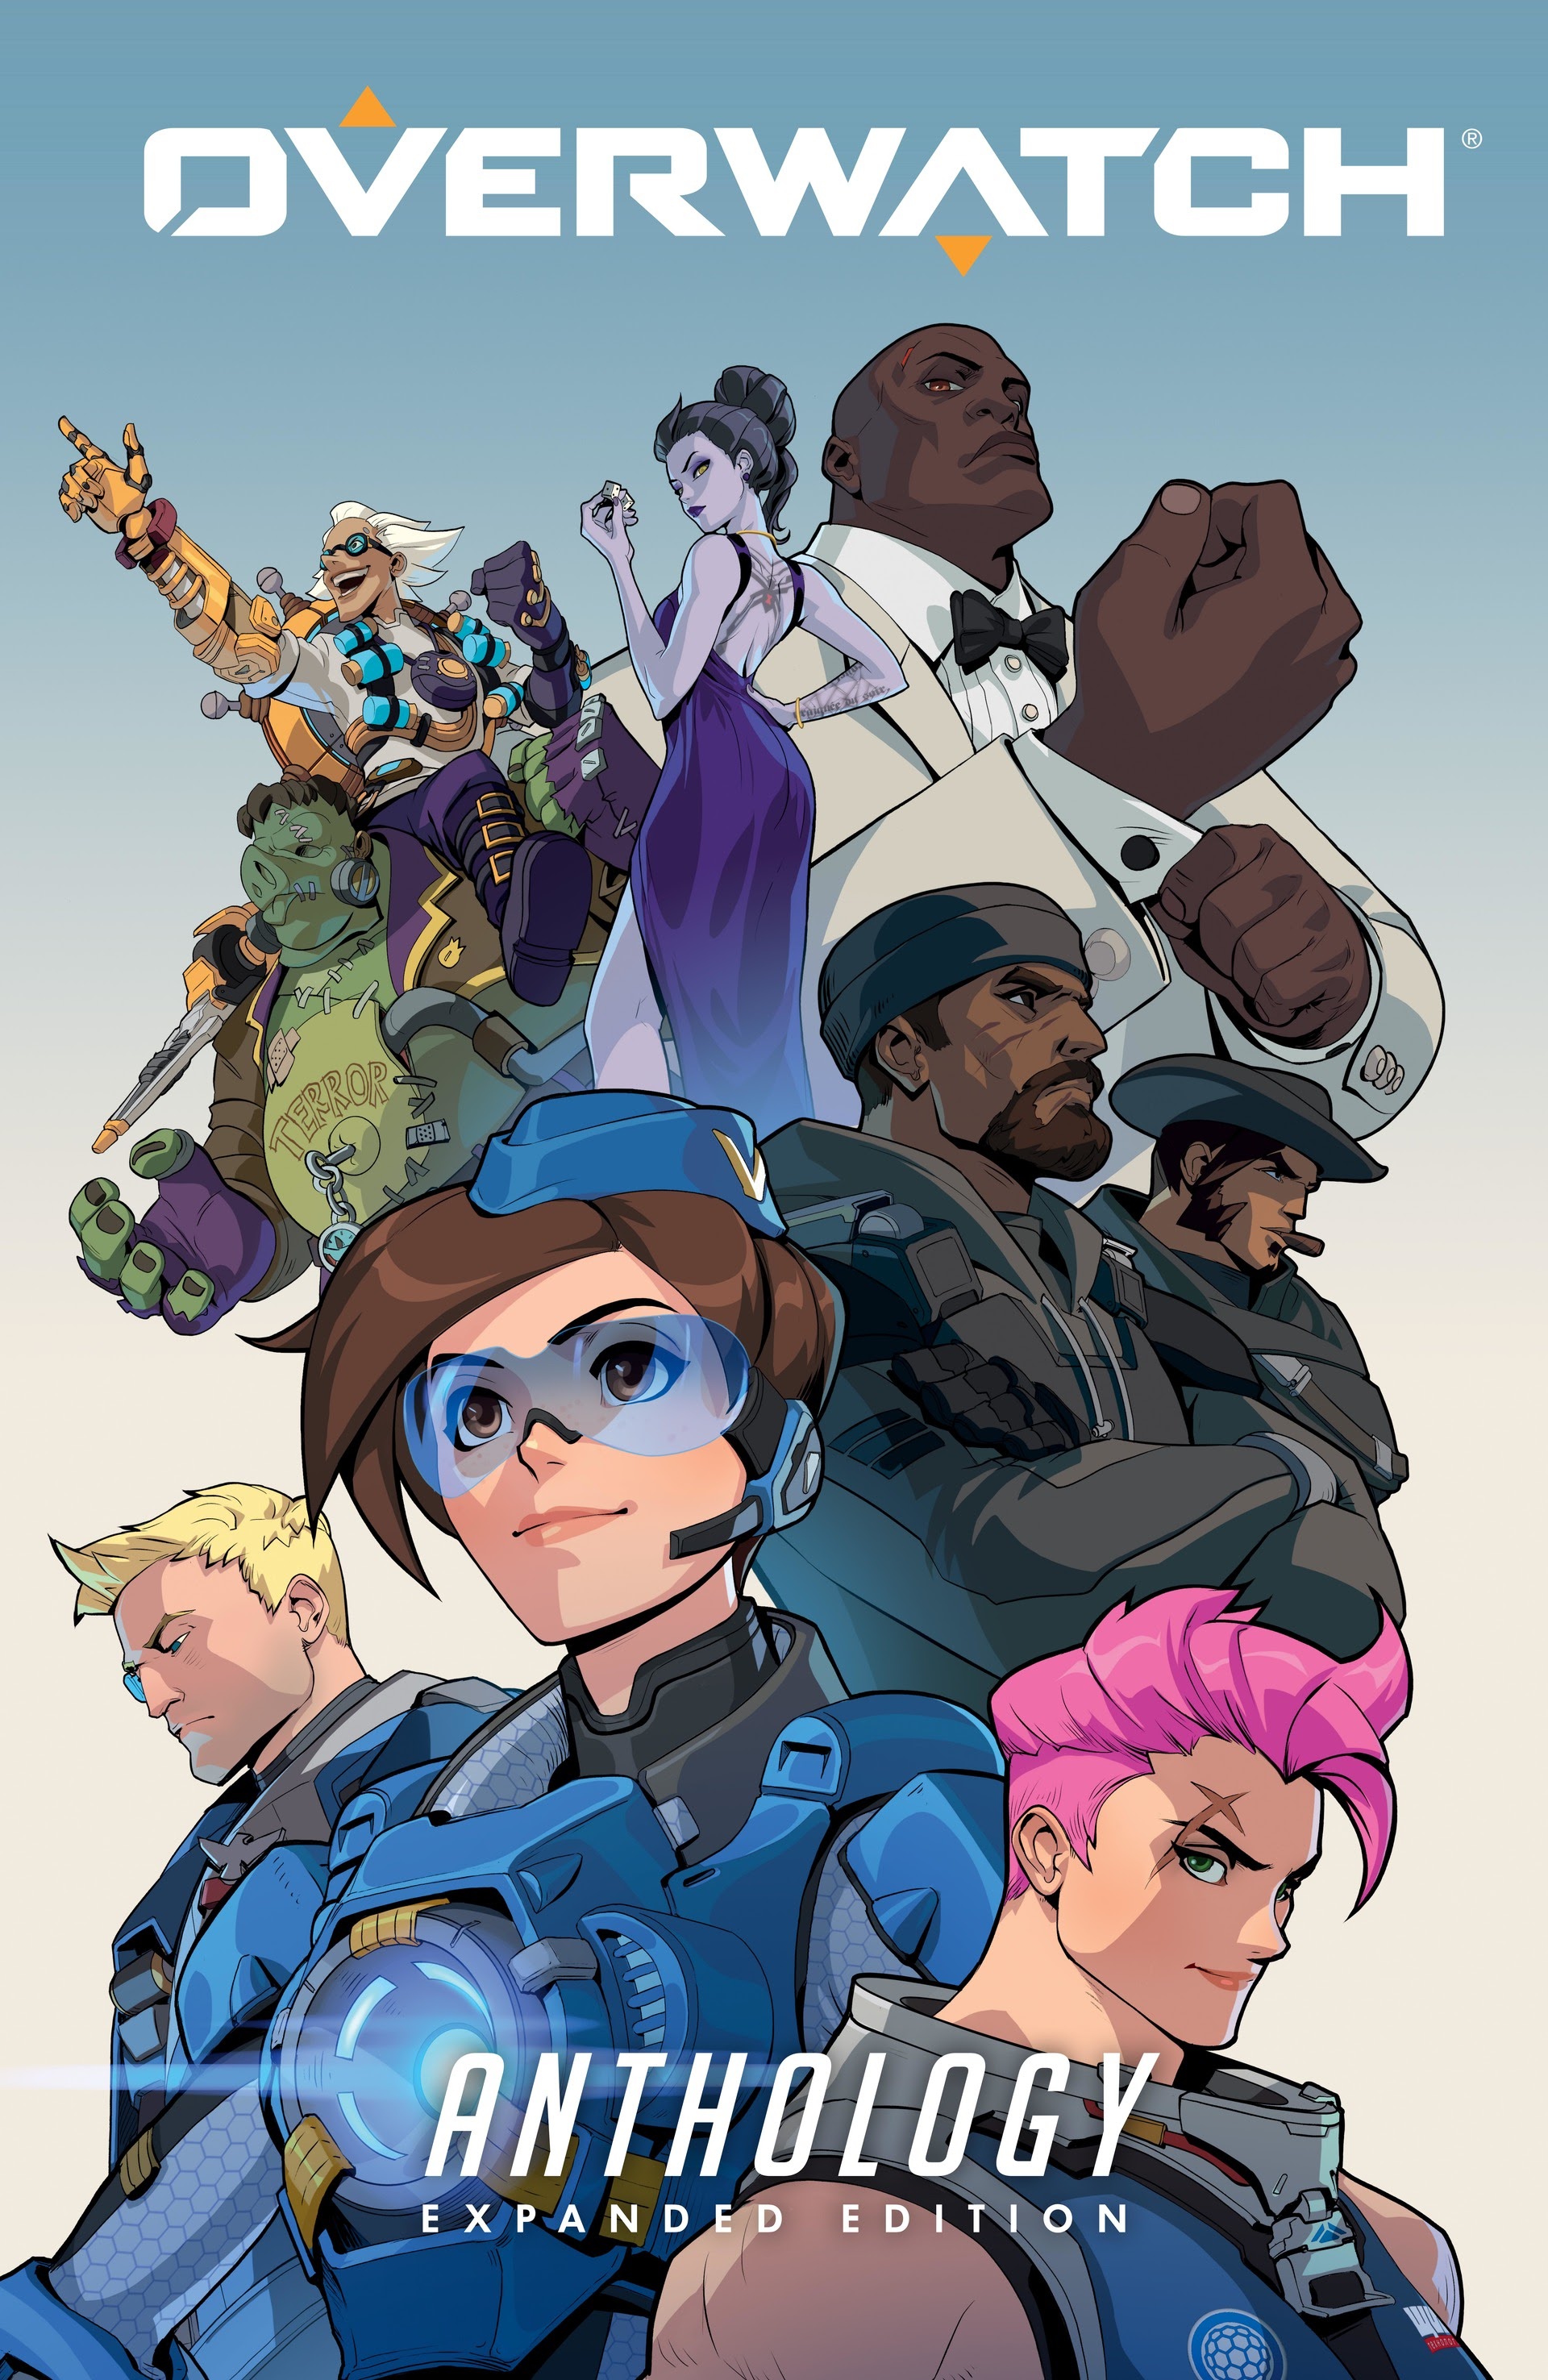 Read online Overwatch Anthology: Expanded Edition comic -  Issue # TPB (Part 1) - 1